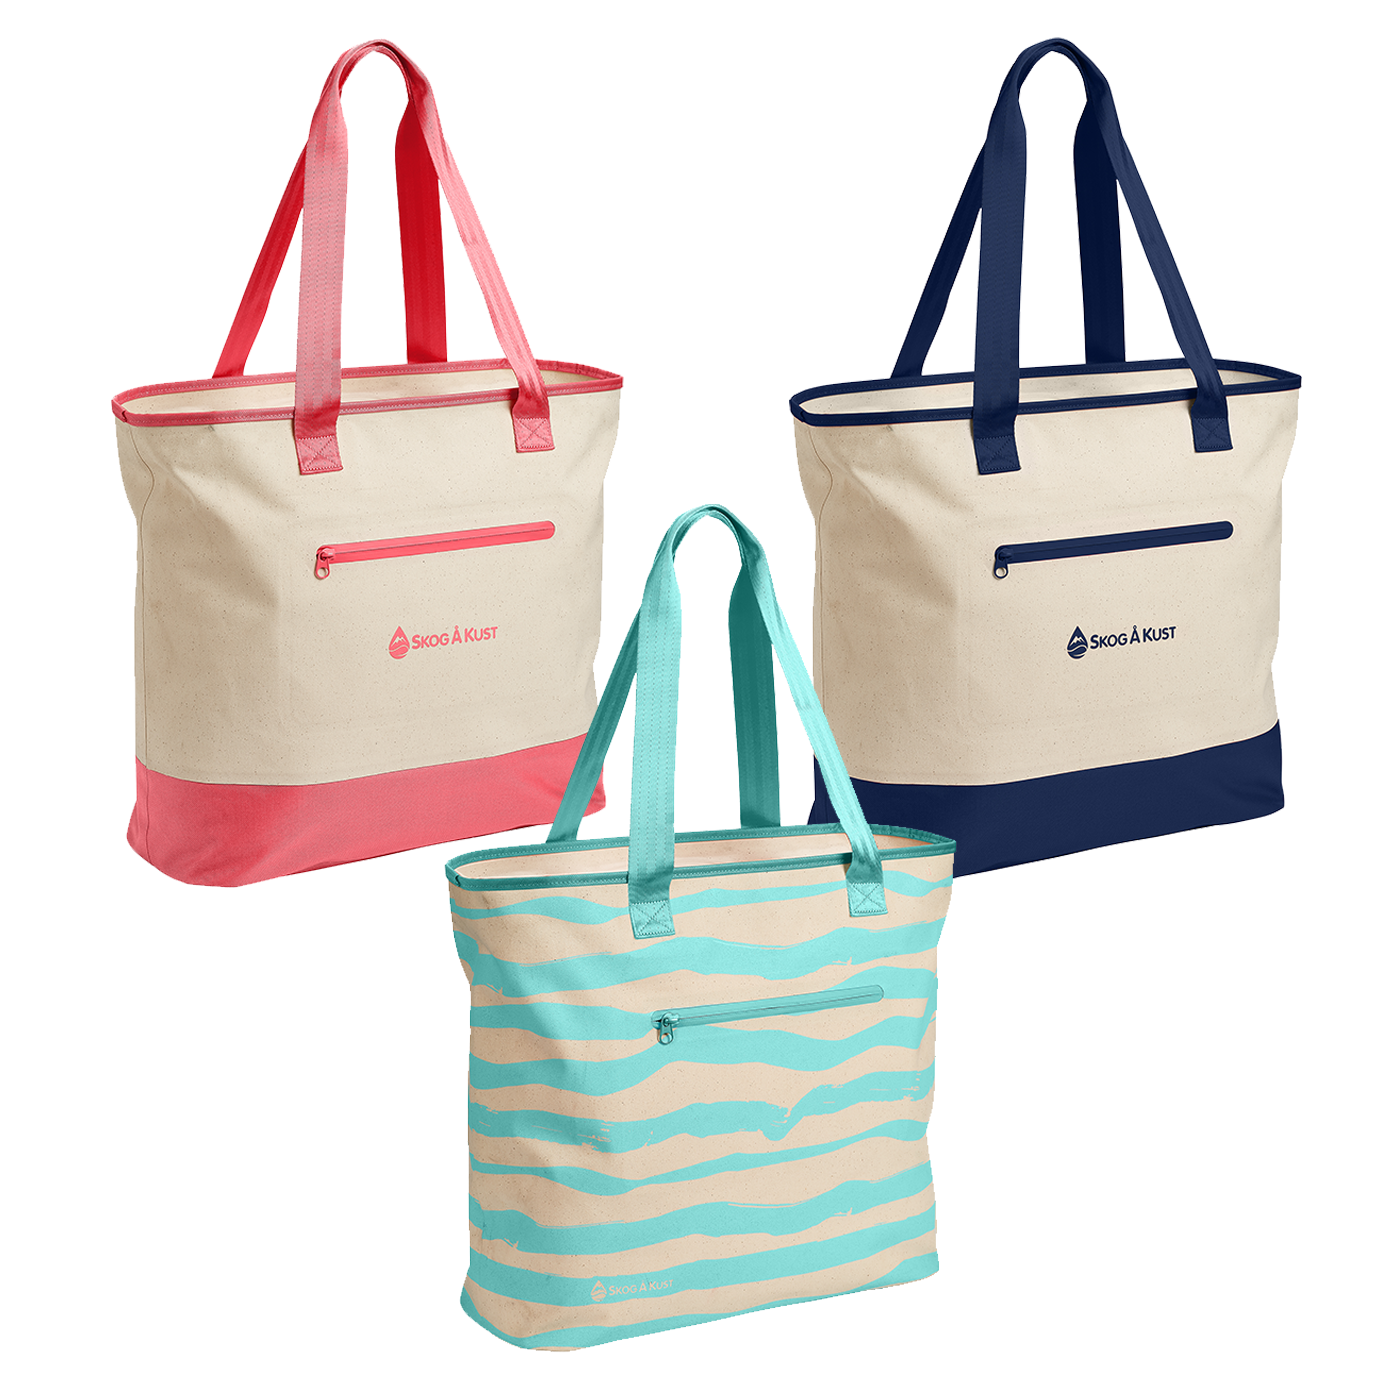 Customized Polyester Beach Tote Bags with Zipper - Personalized Tote B